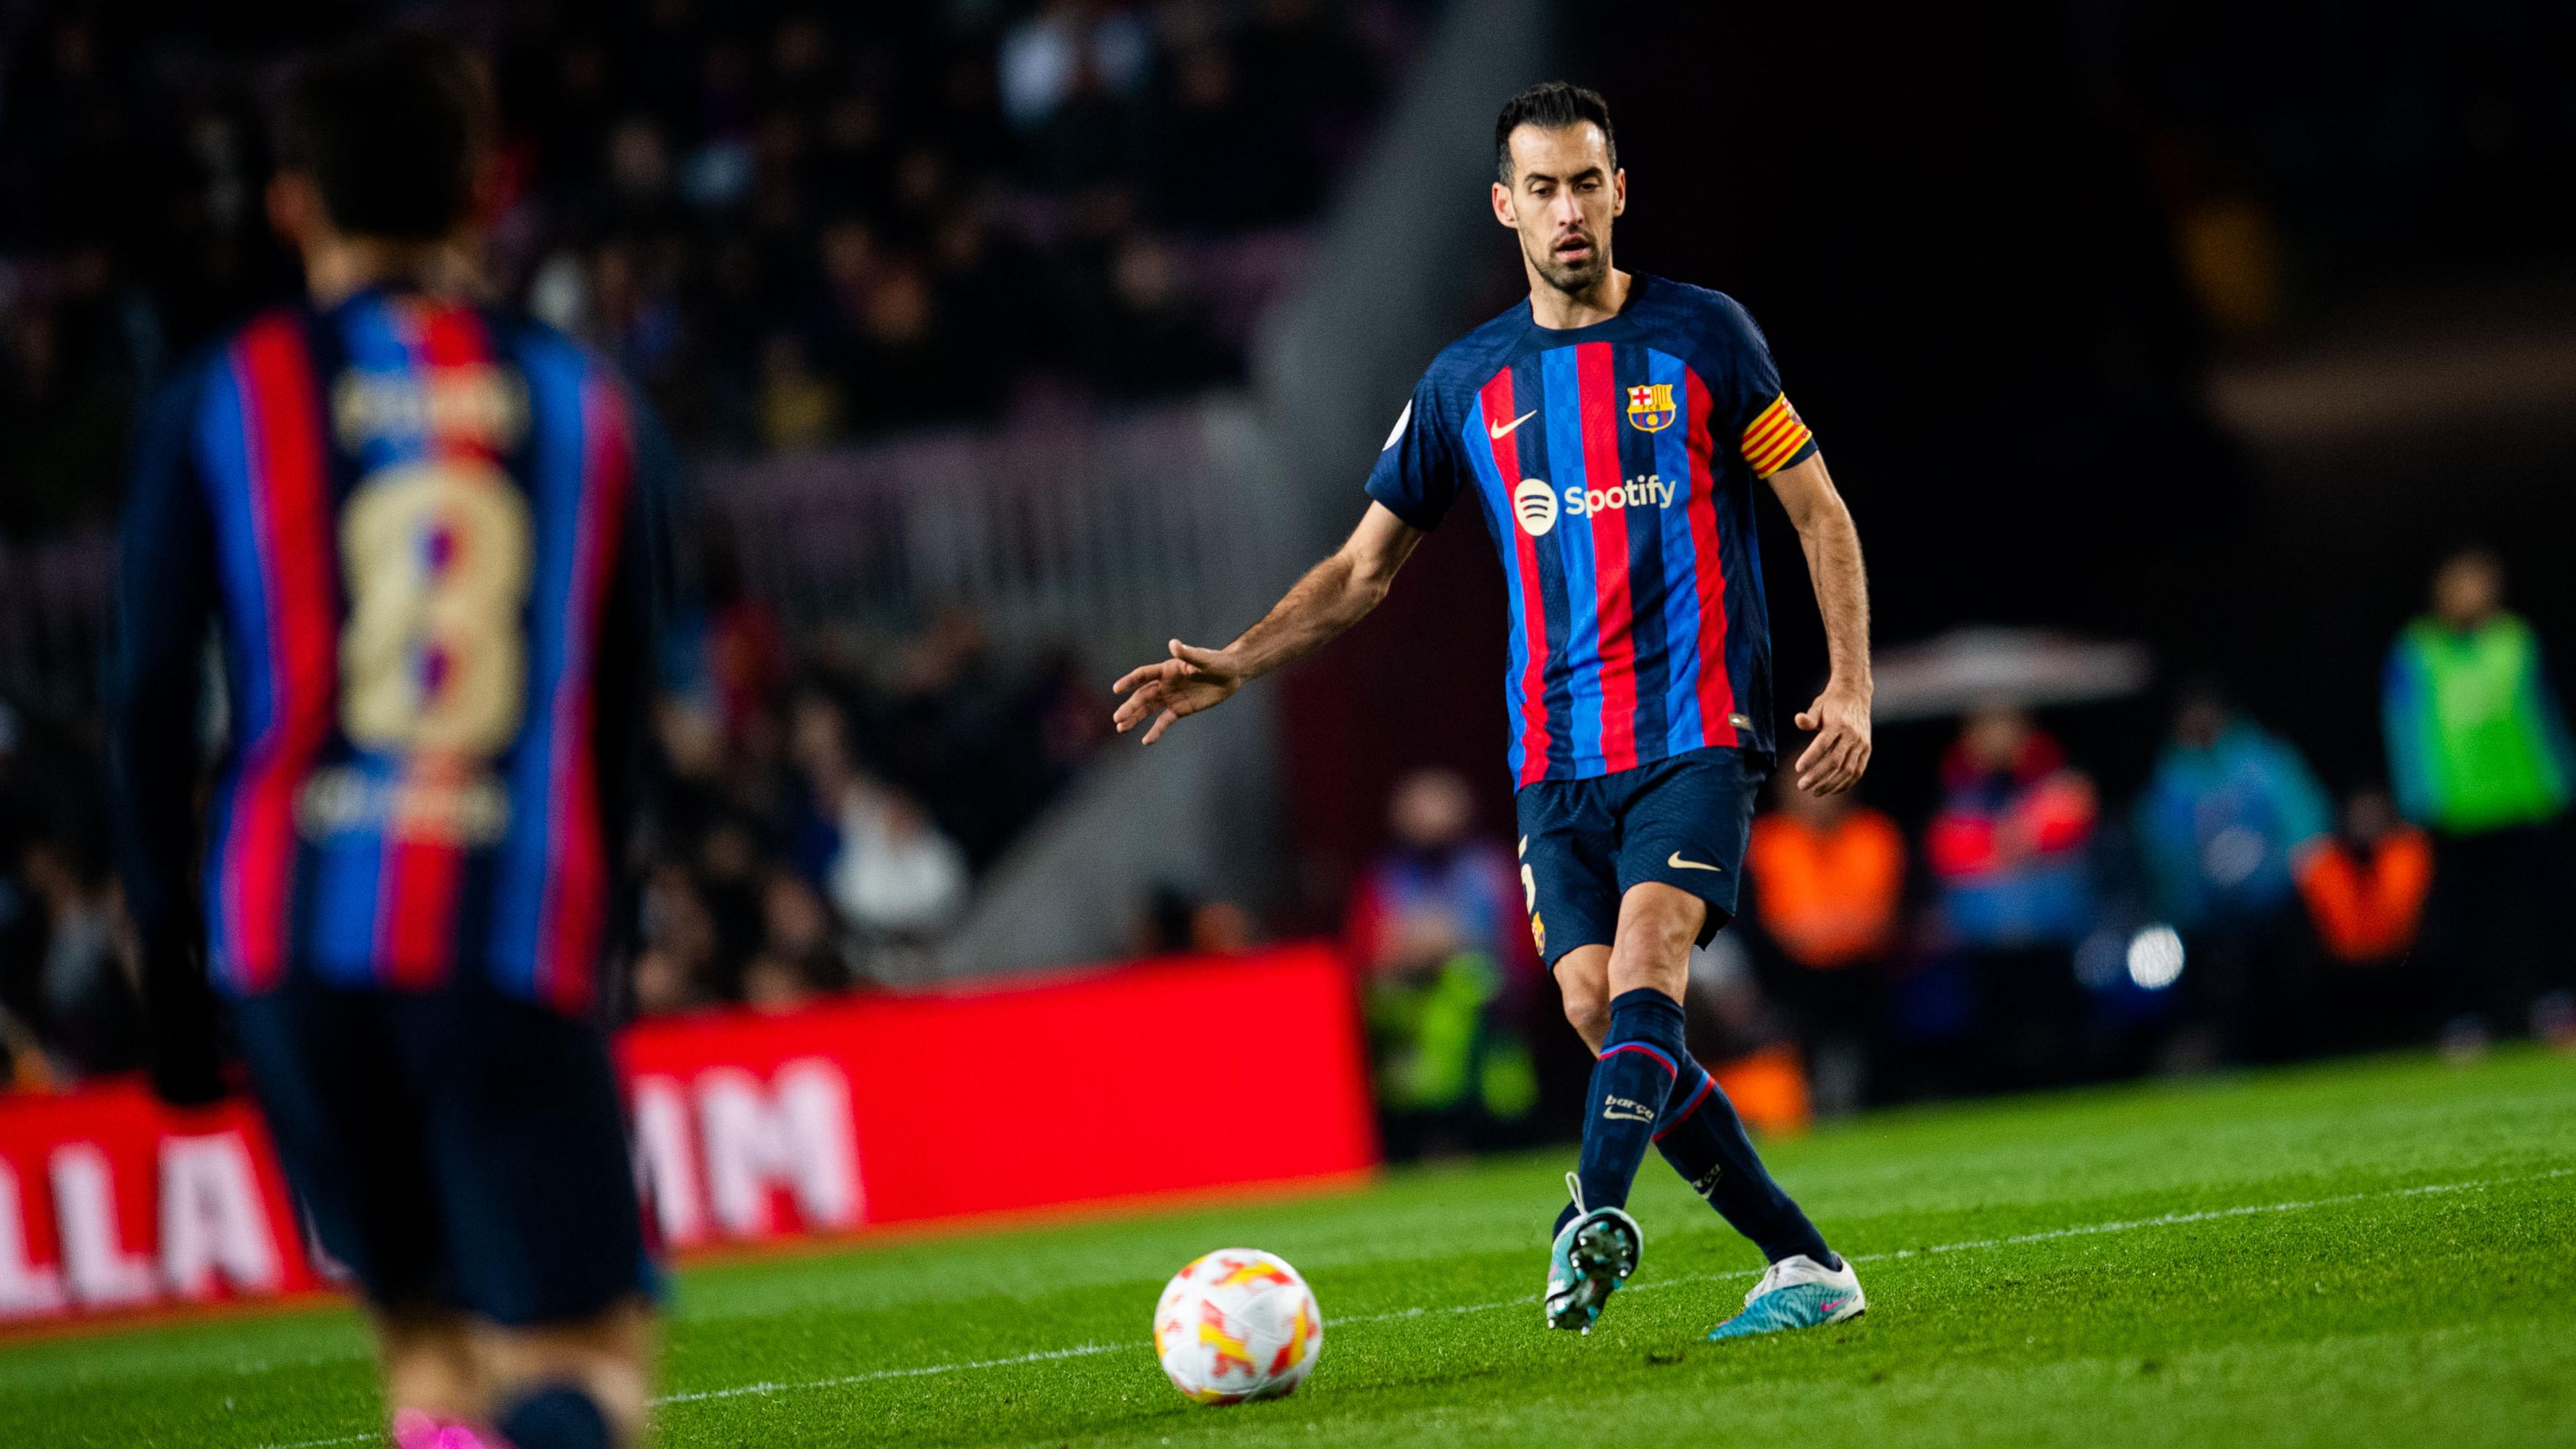 Sergio Busquets has sprained ankle